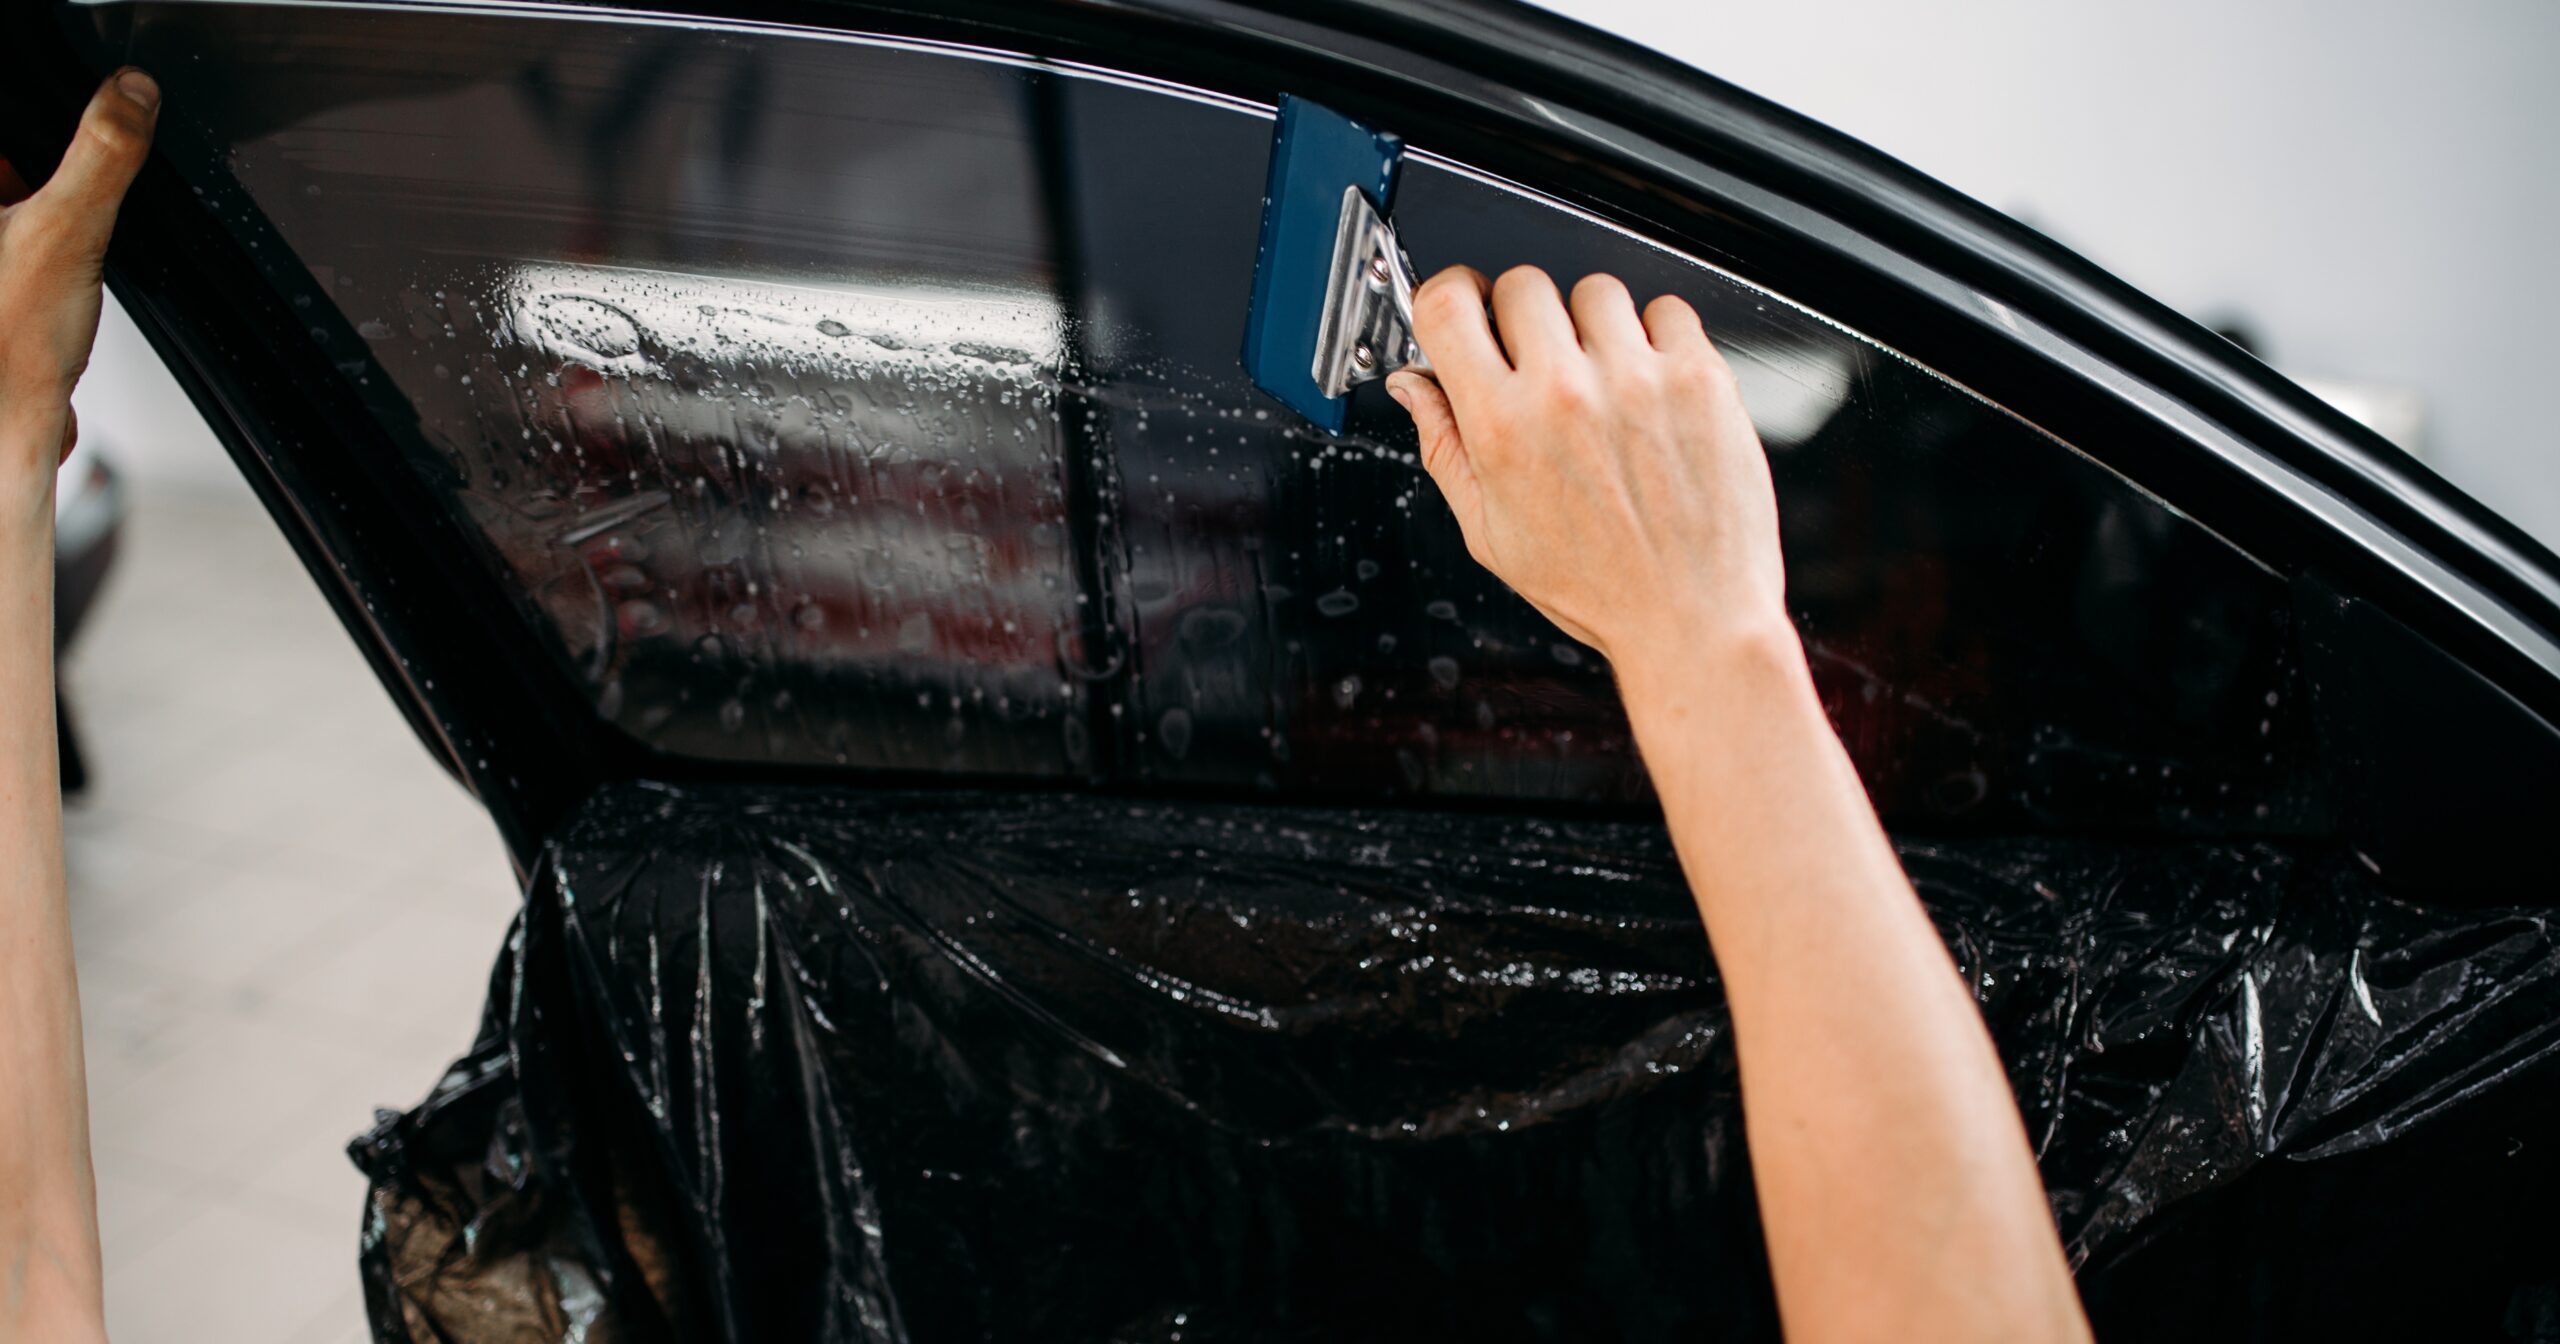 How Long Does It Take To Tint A Car?